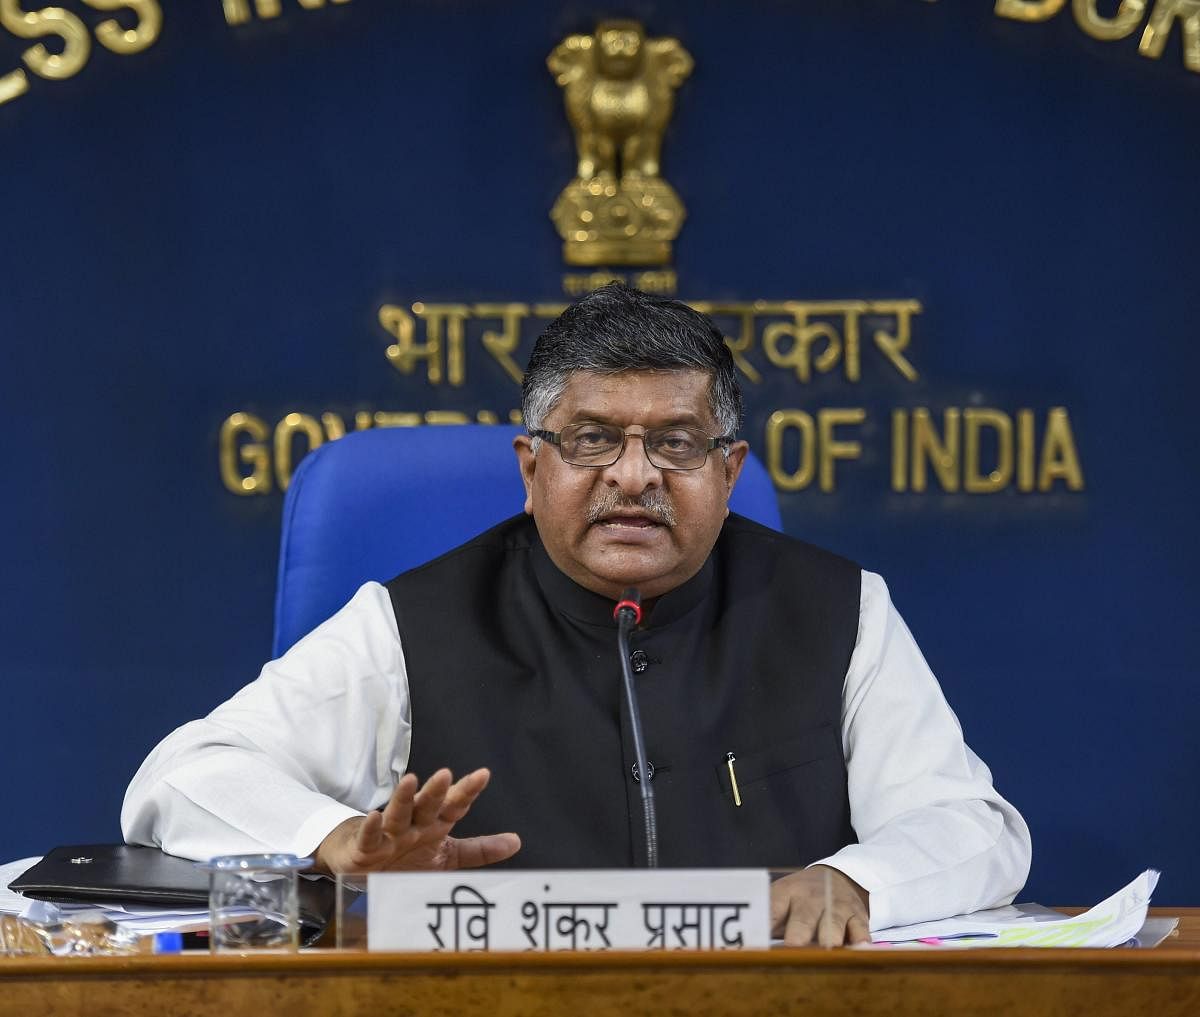 IT Minister Ravi Shankar Prasad, after meeting WhatsApp Head Chris Daniels, said the Facebook-owned messaging app has contributed significantly to India's digital story but it needs to find solutions to deal with "sinister developments" like mob lynching